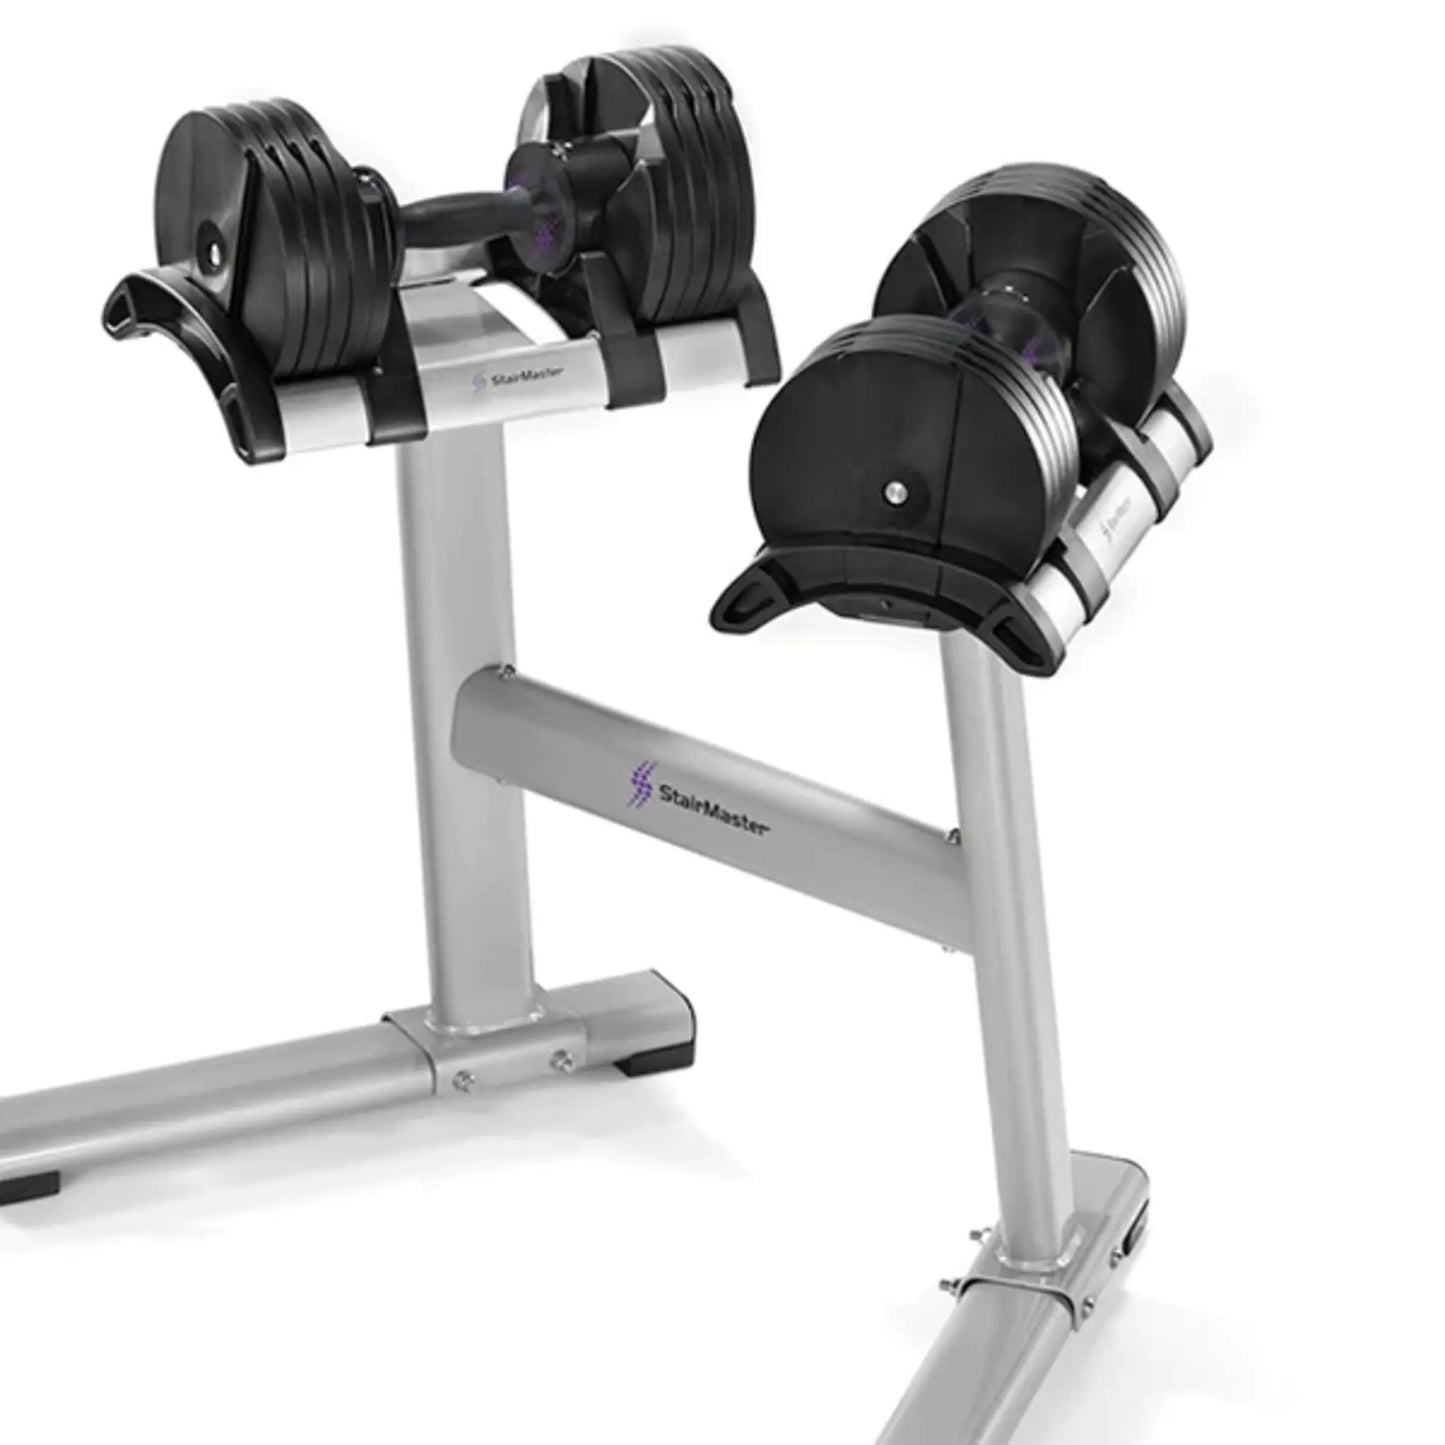 Stairmaster adjustable dumbbells with stand